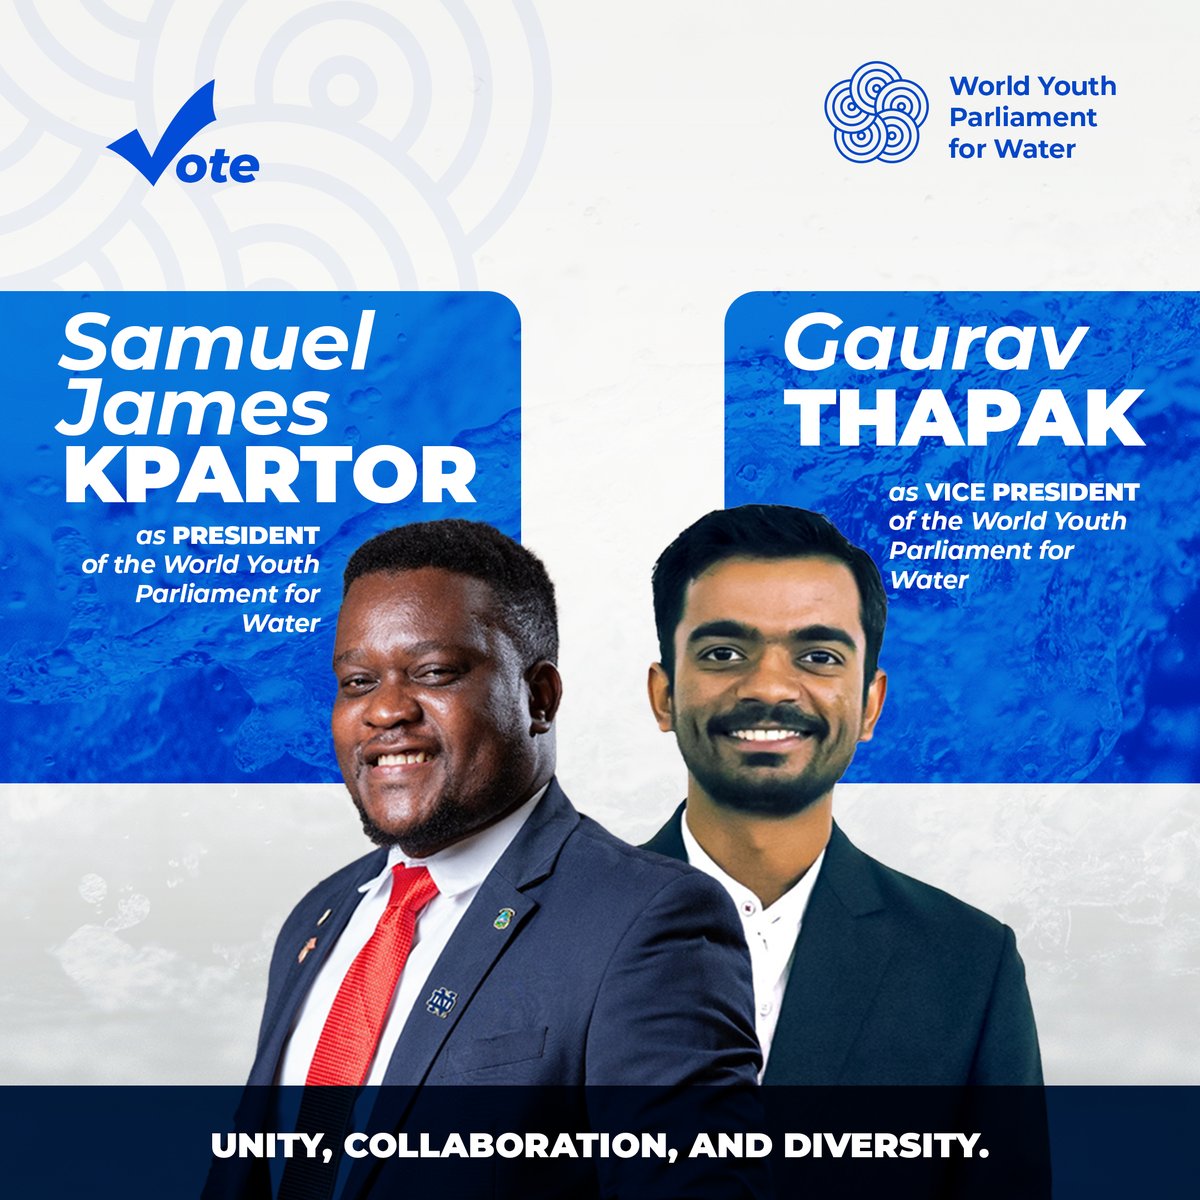 #SamuelGaurav #takeover 🗳Your vote can shape the future of water leadership! 🌏 Cast your support for Samuel and Gaurav - the dynamic duo ready to make a splash in the world of water. 💦 #TeamAQUA #VoteNow #YouthLeaders #WaterSolutions 🚀